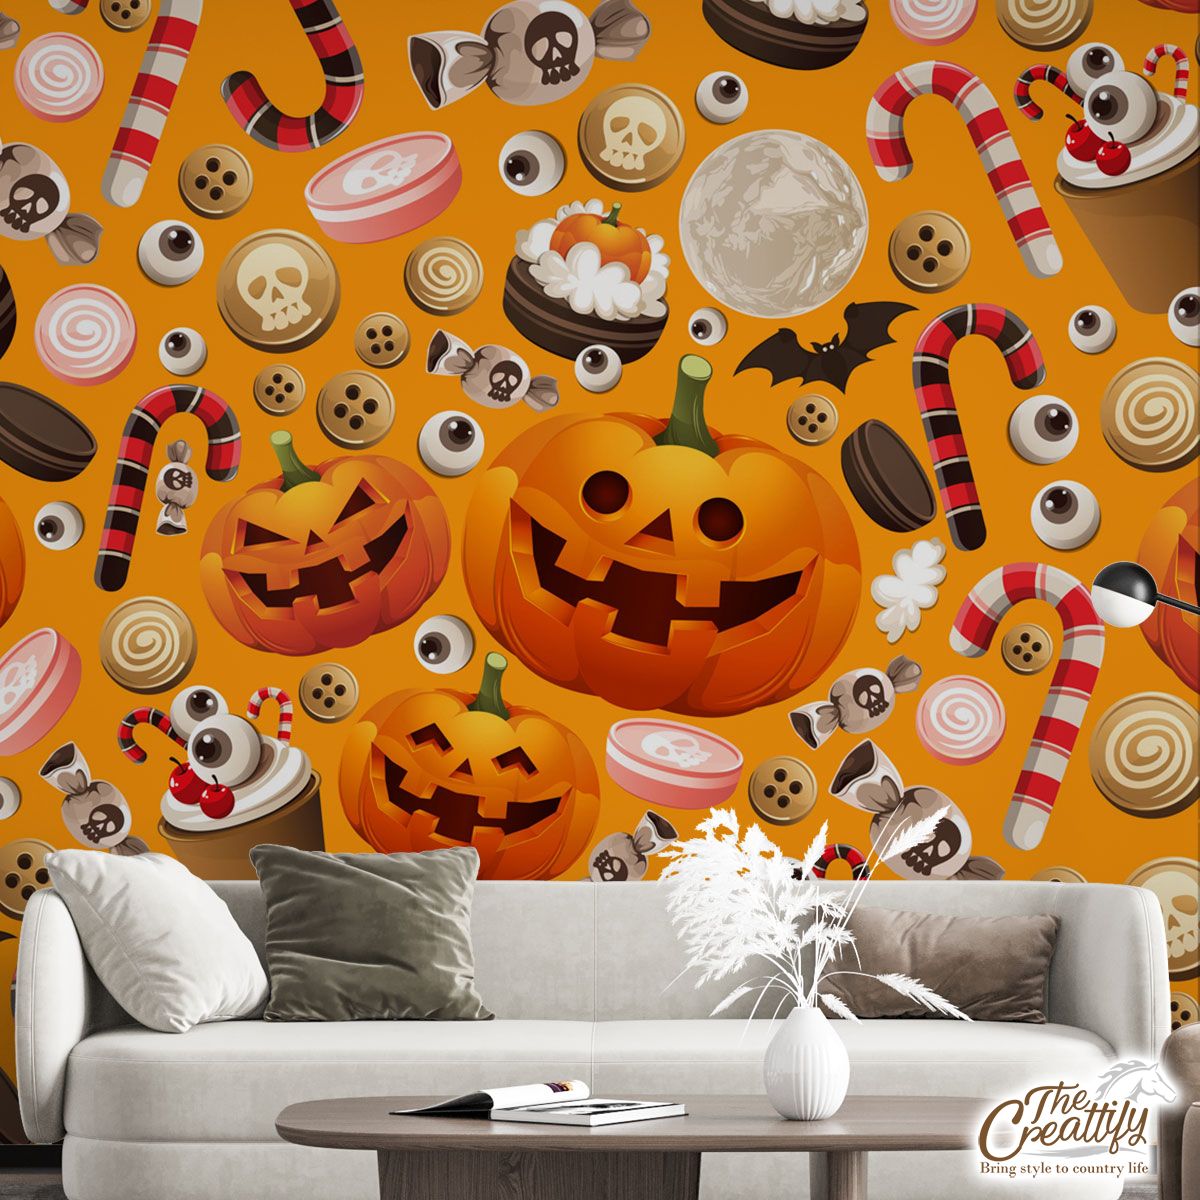 Halloween Party Food On Orange Background Wall Mural